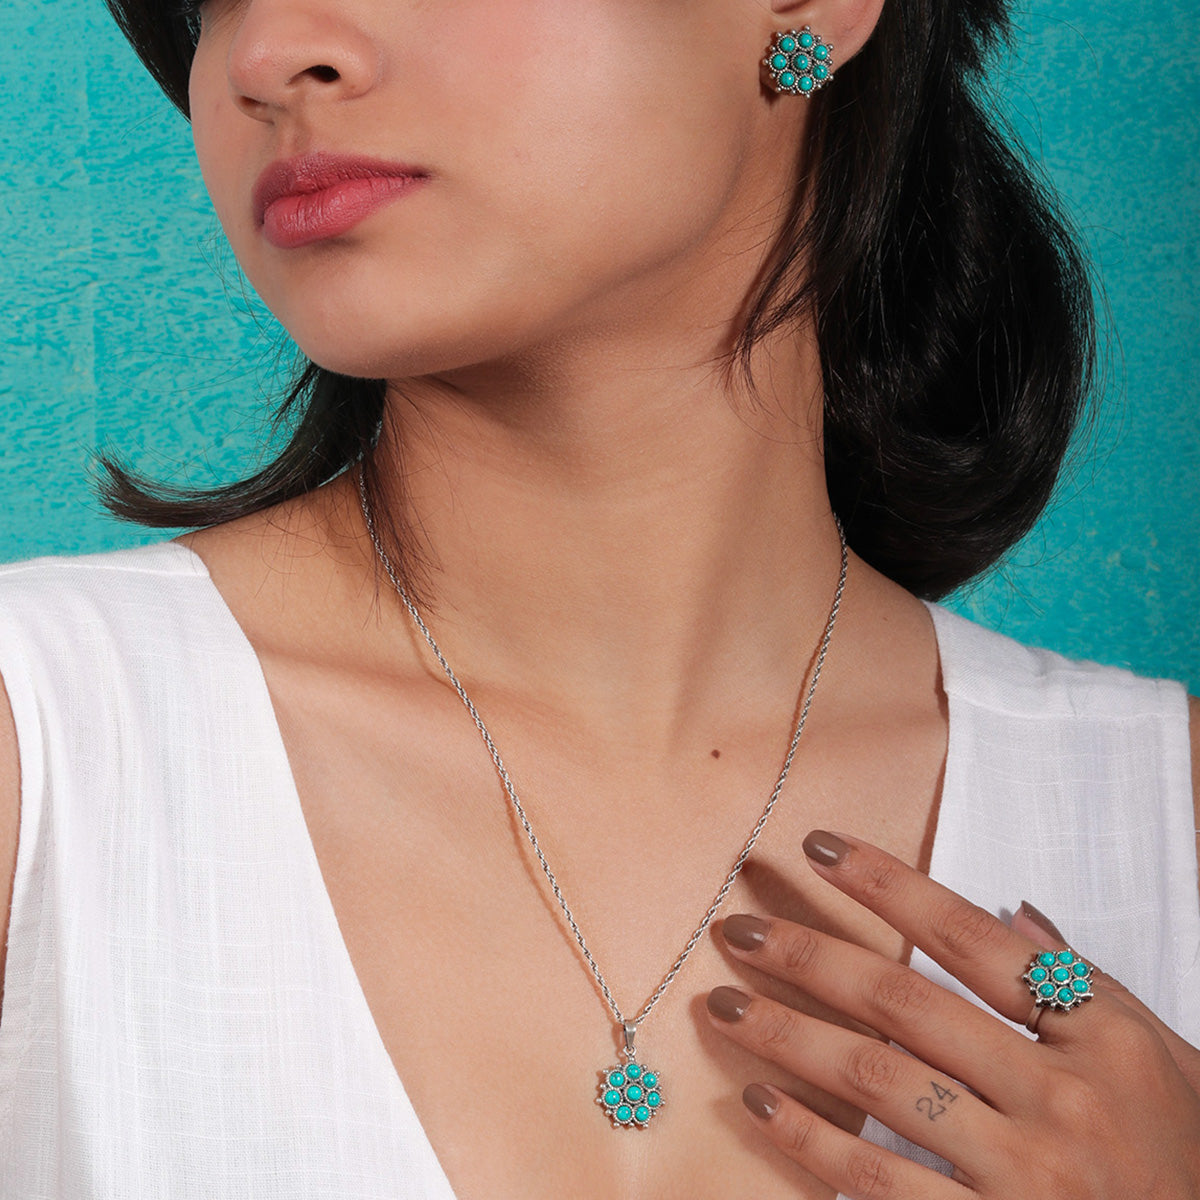 Adaa Turquoise Silver Chain Pendant by MOHA